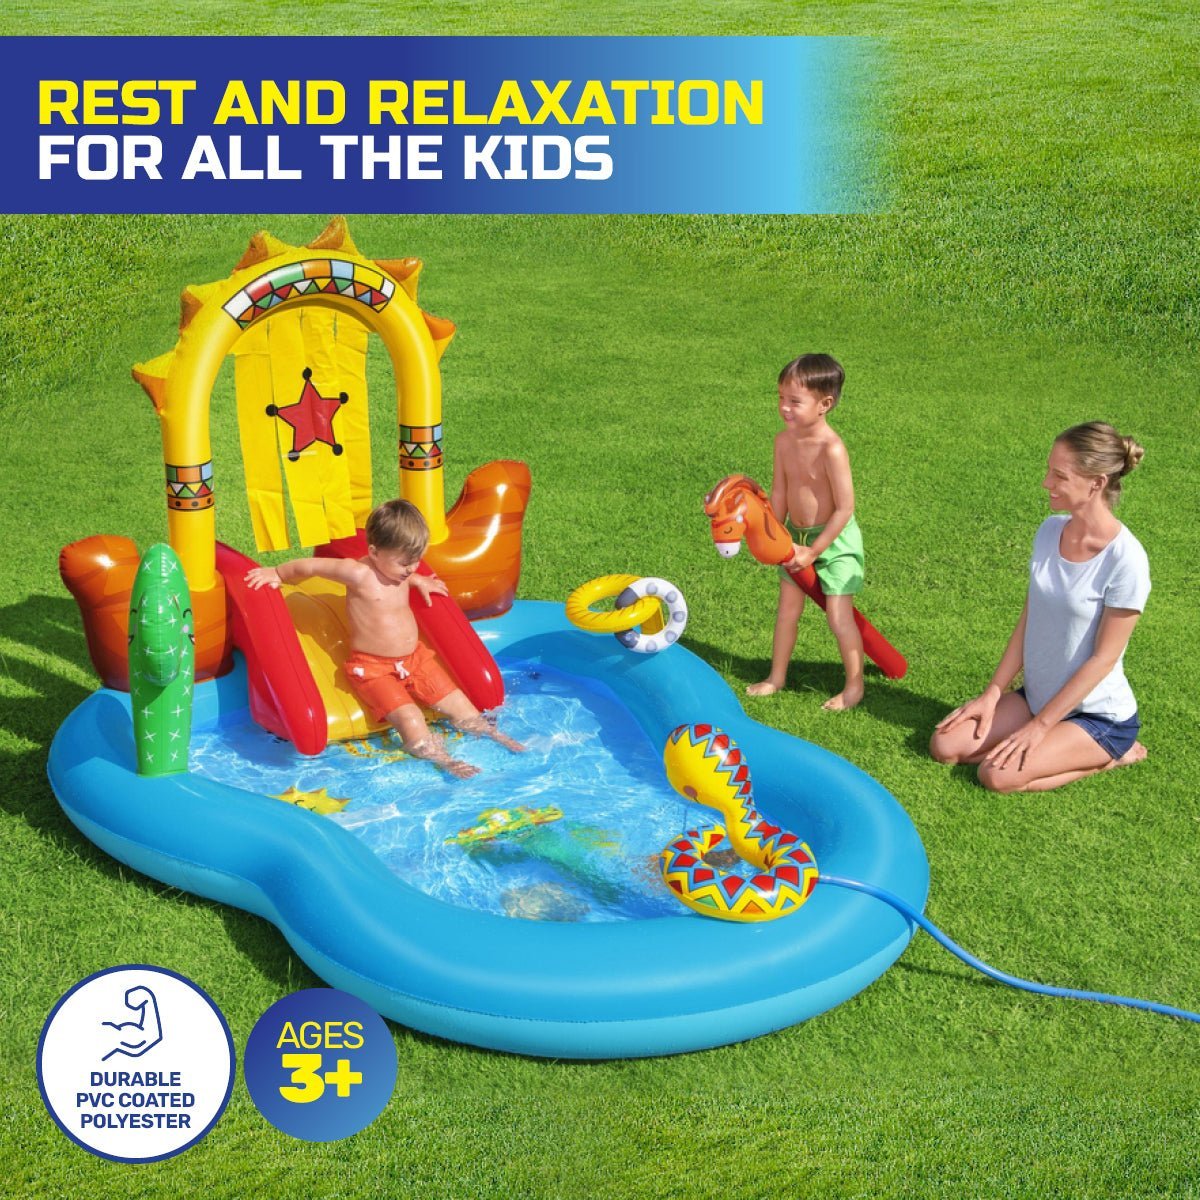 Bestway 2.6 x 1.8m Inflatable Wild West Water Fun Park Pool With Slide 278L - Little Kids Business